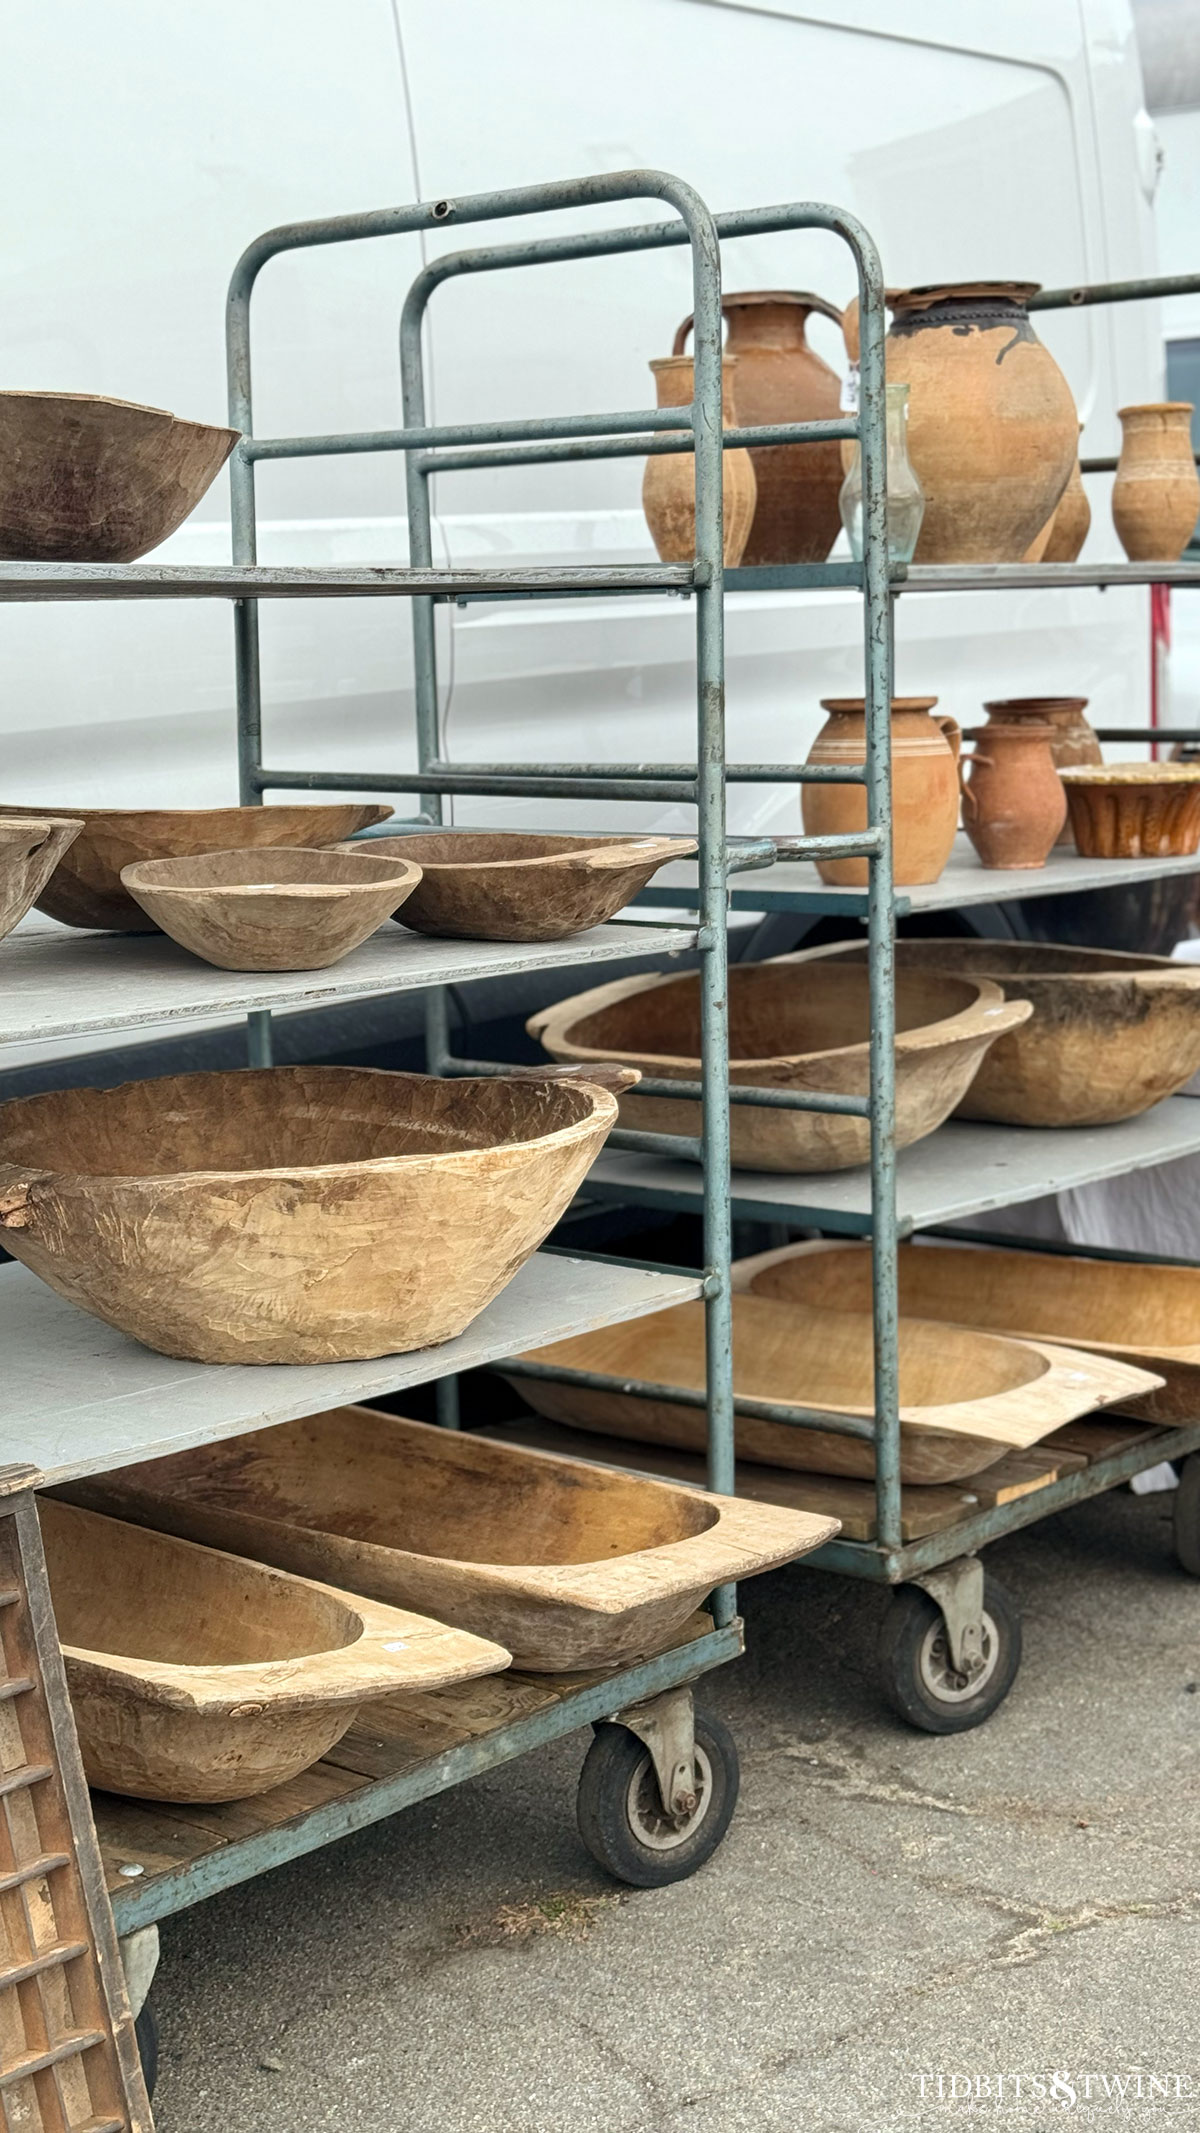 racks of antique dough bowls in all sizes on display at an antique fair